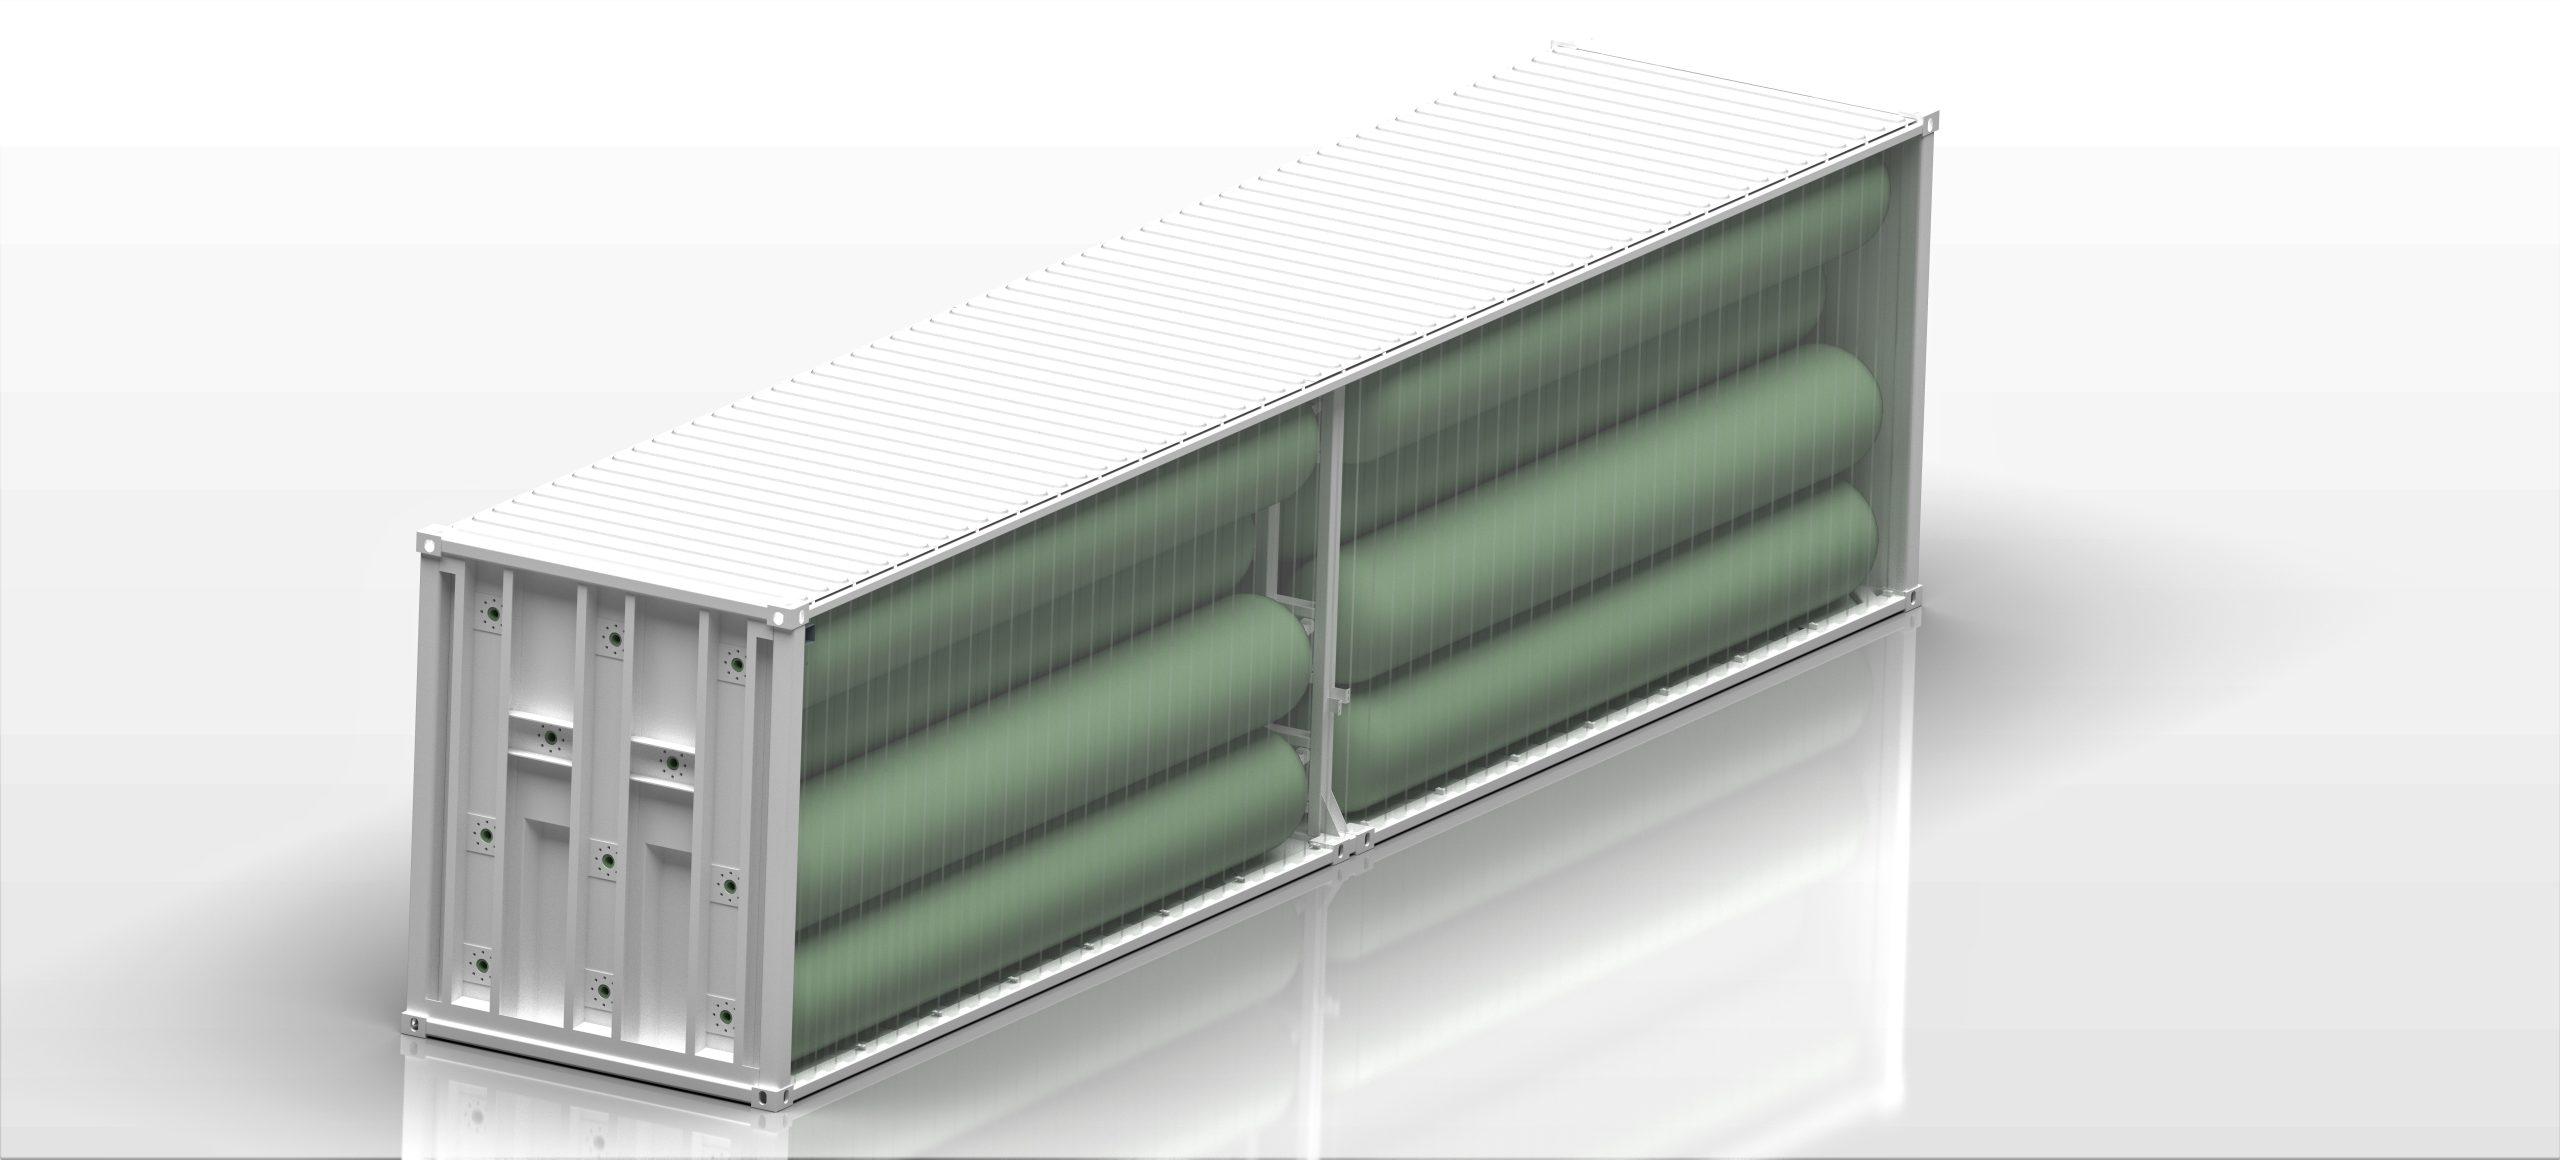 Product Gen2 Energy and Umoe Advanced Composites sign contract for development and purchase of containers for large scale transport of green hydrogen - gen2energy.com image